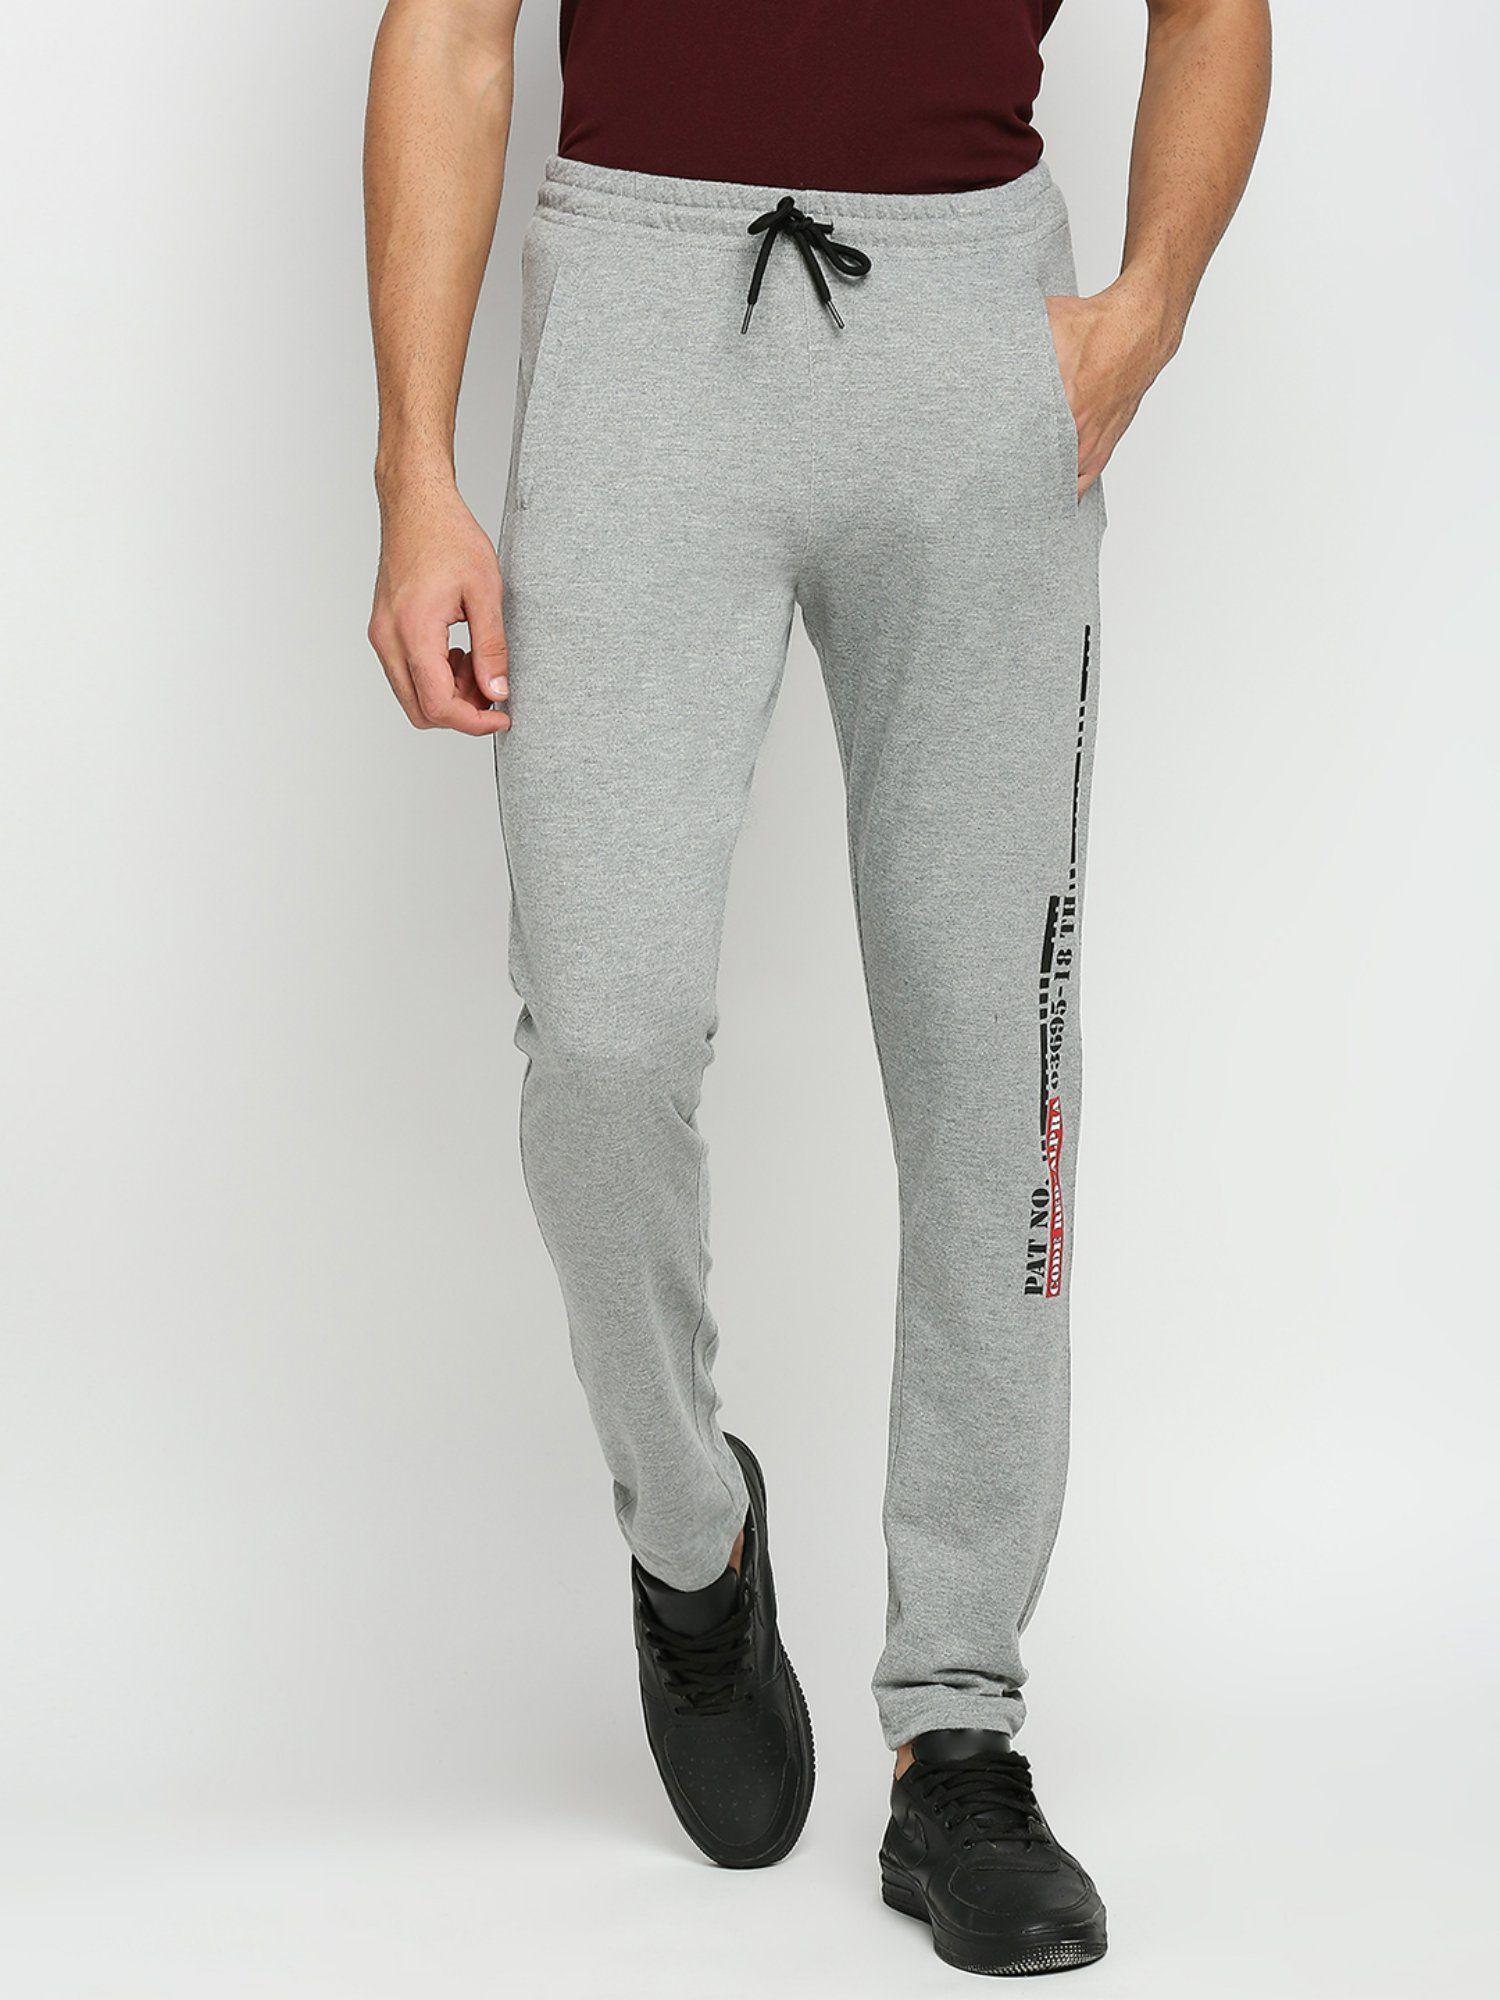 cotton polyester slim fit french terry knit joggers for mens - grey